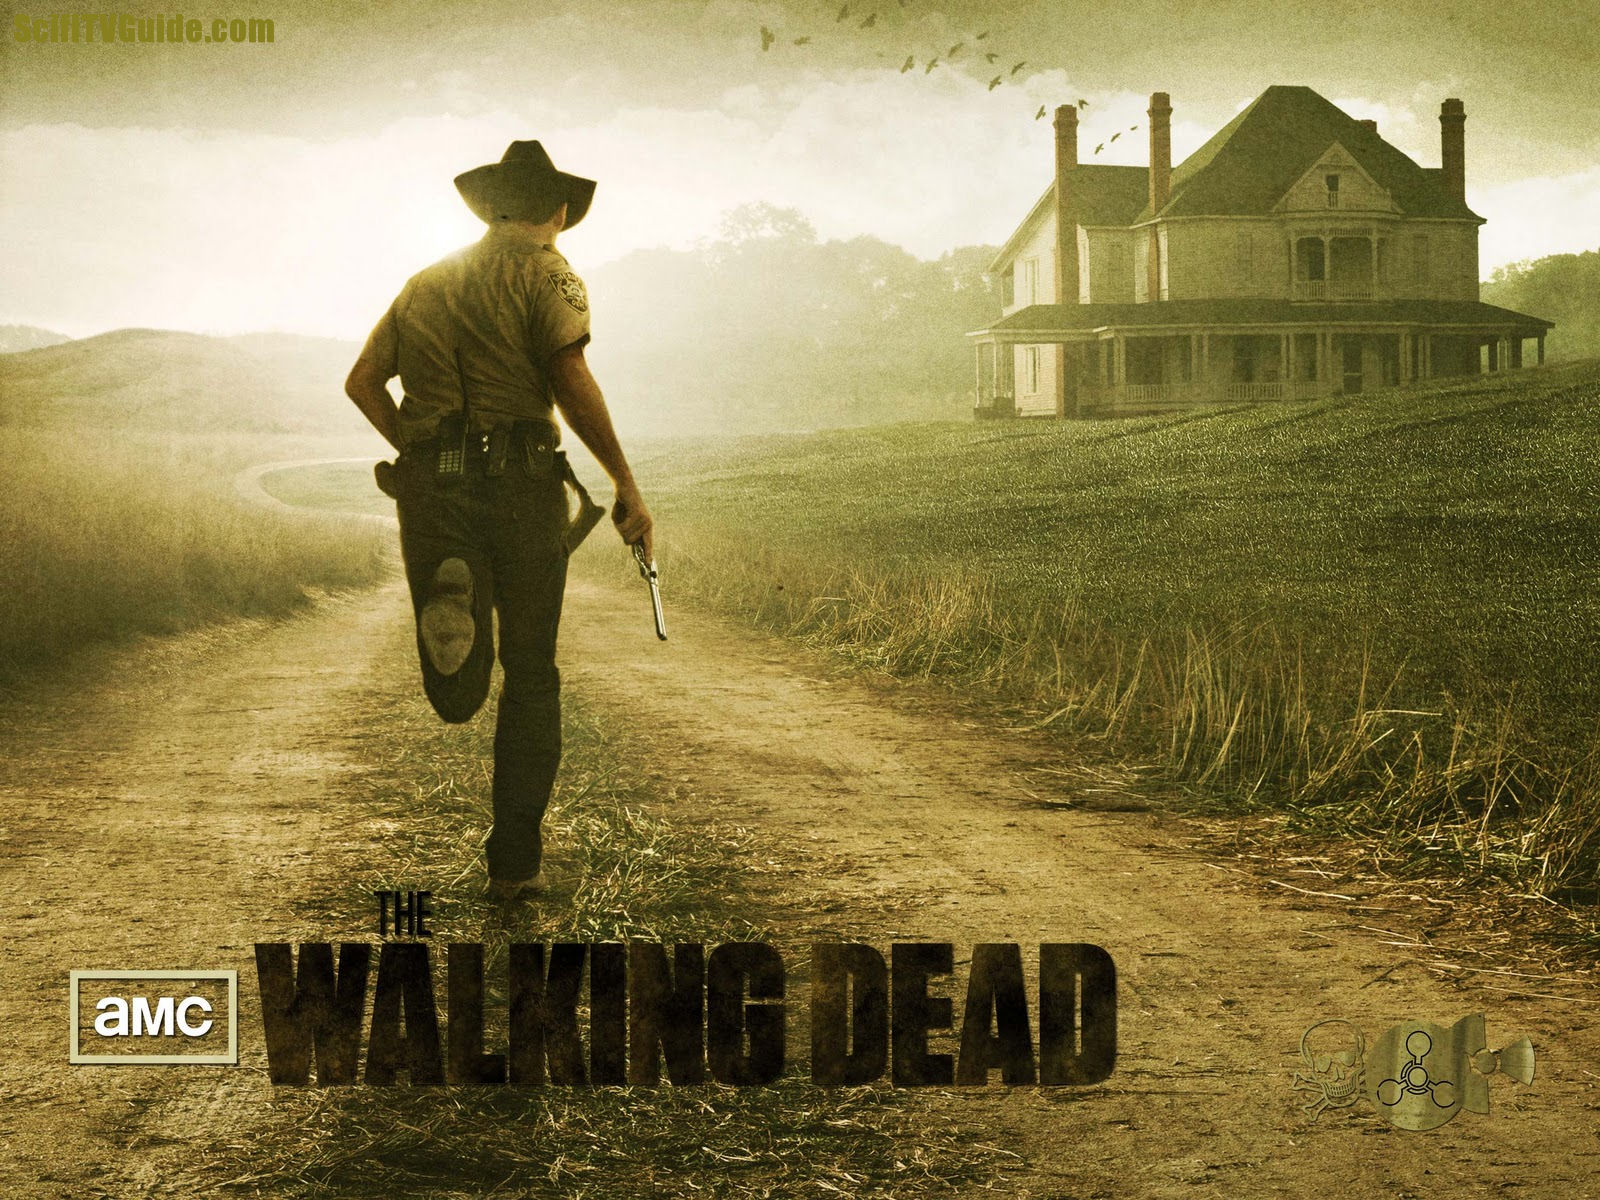 Full HD The Walking Dead Wallpaper Pictures